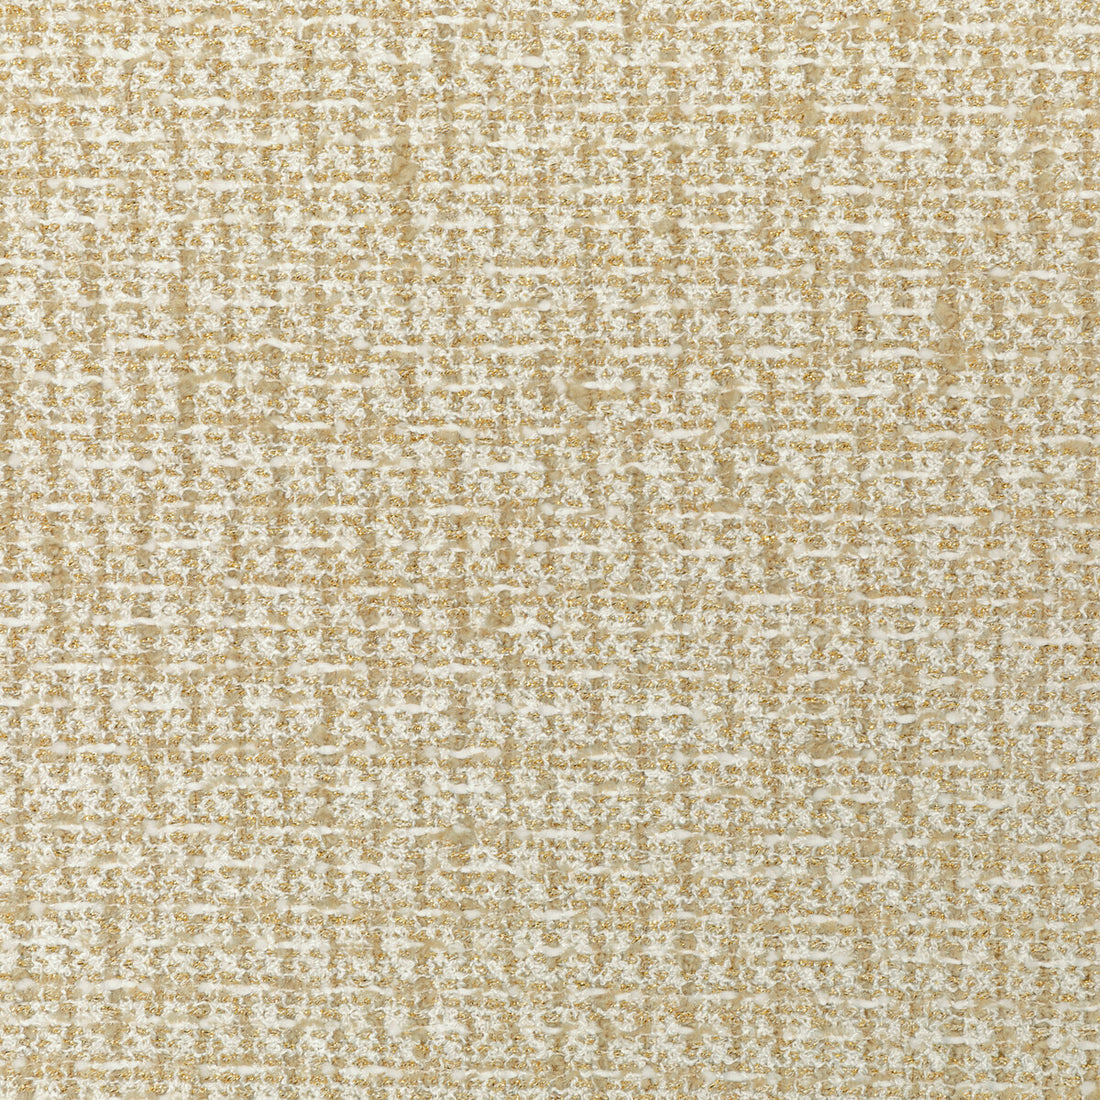 Party Dress fabric in gold color - pattern 36100.416.0 - by Kravet Couture in the Luxury Textures II collection